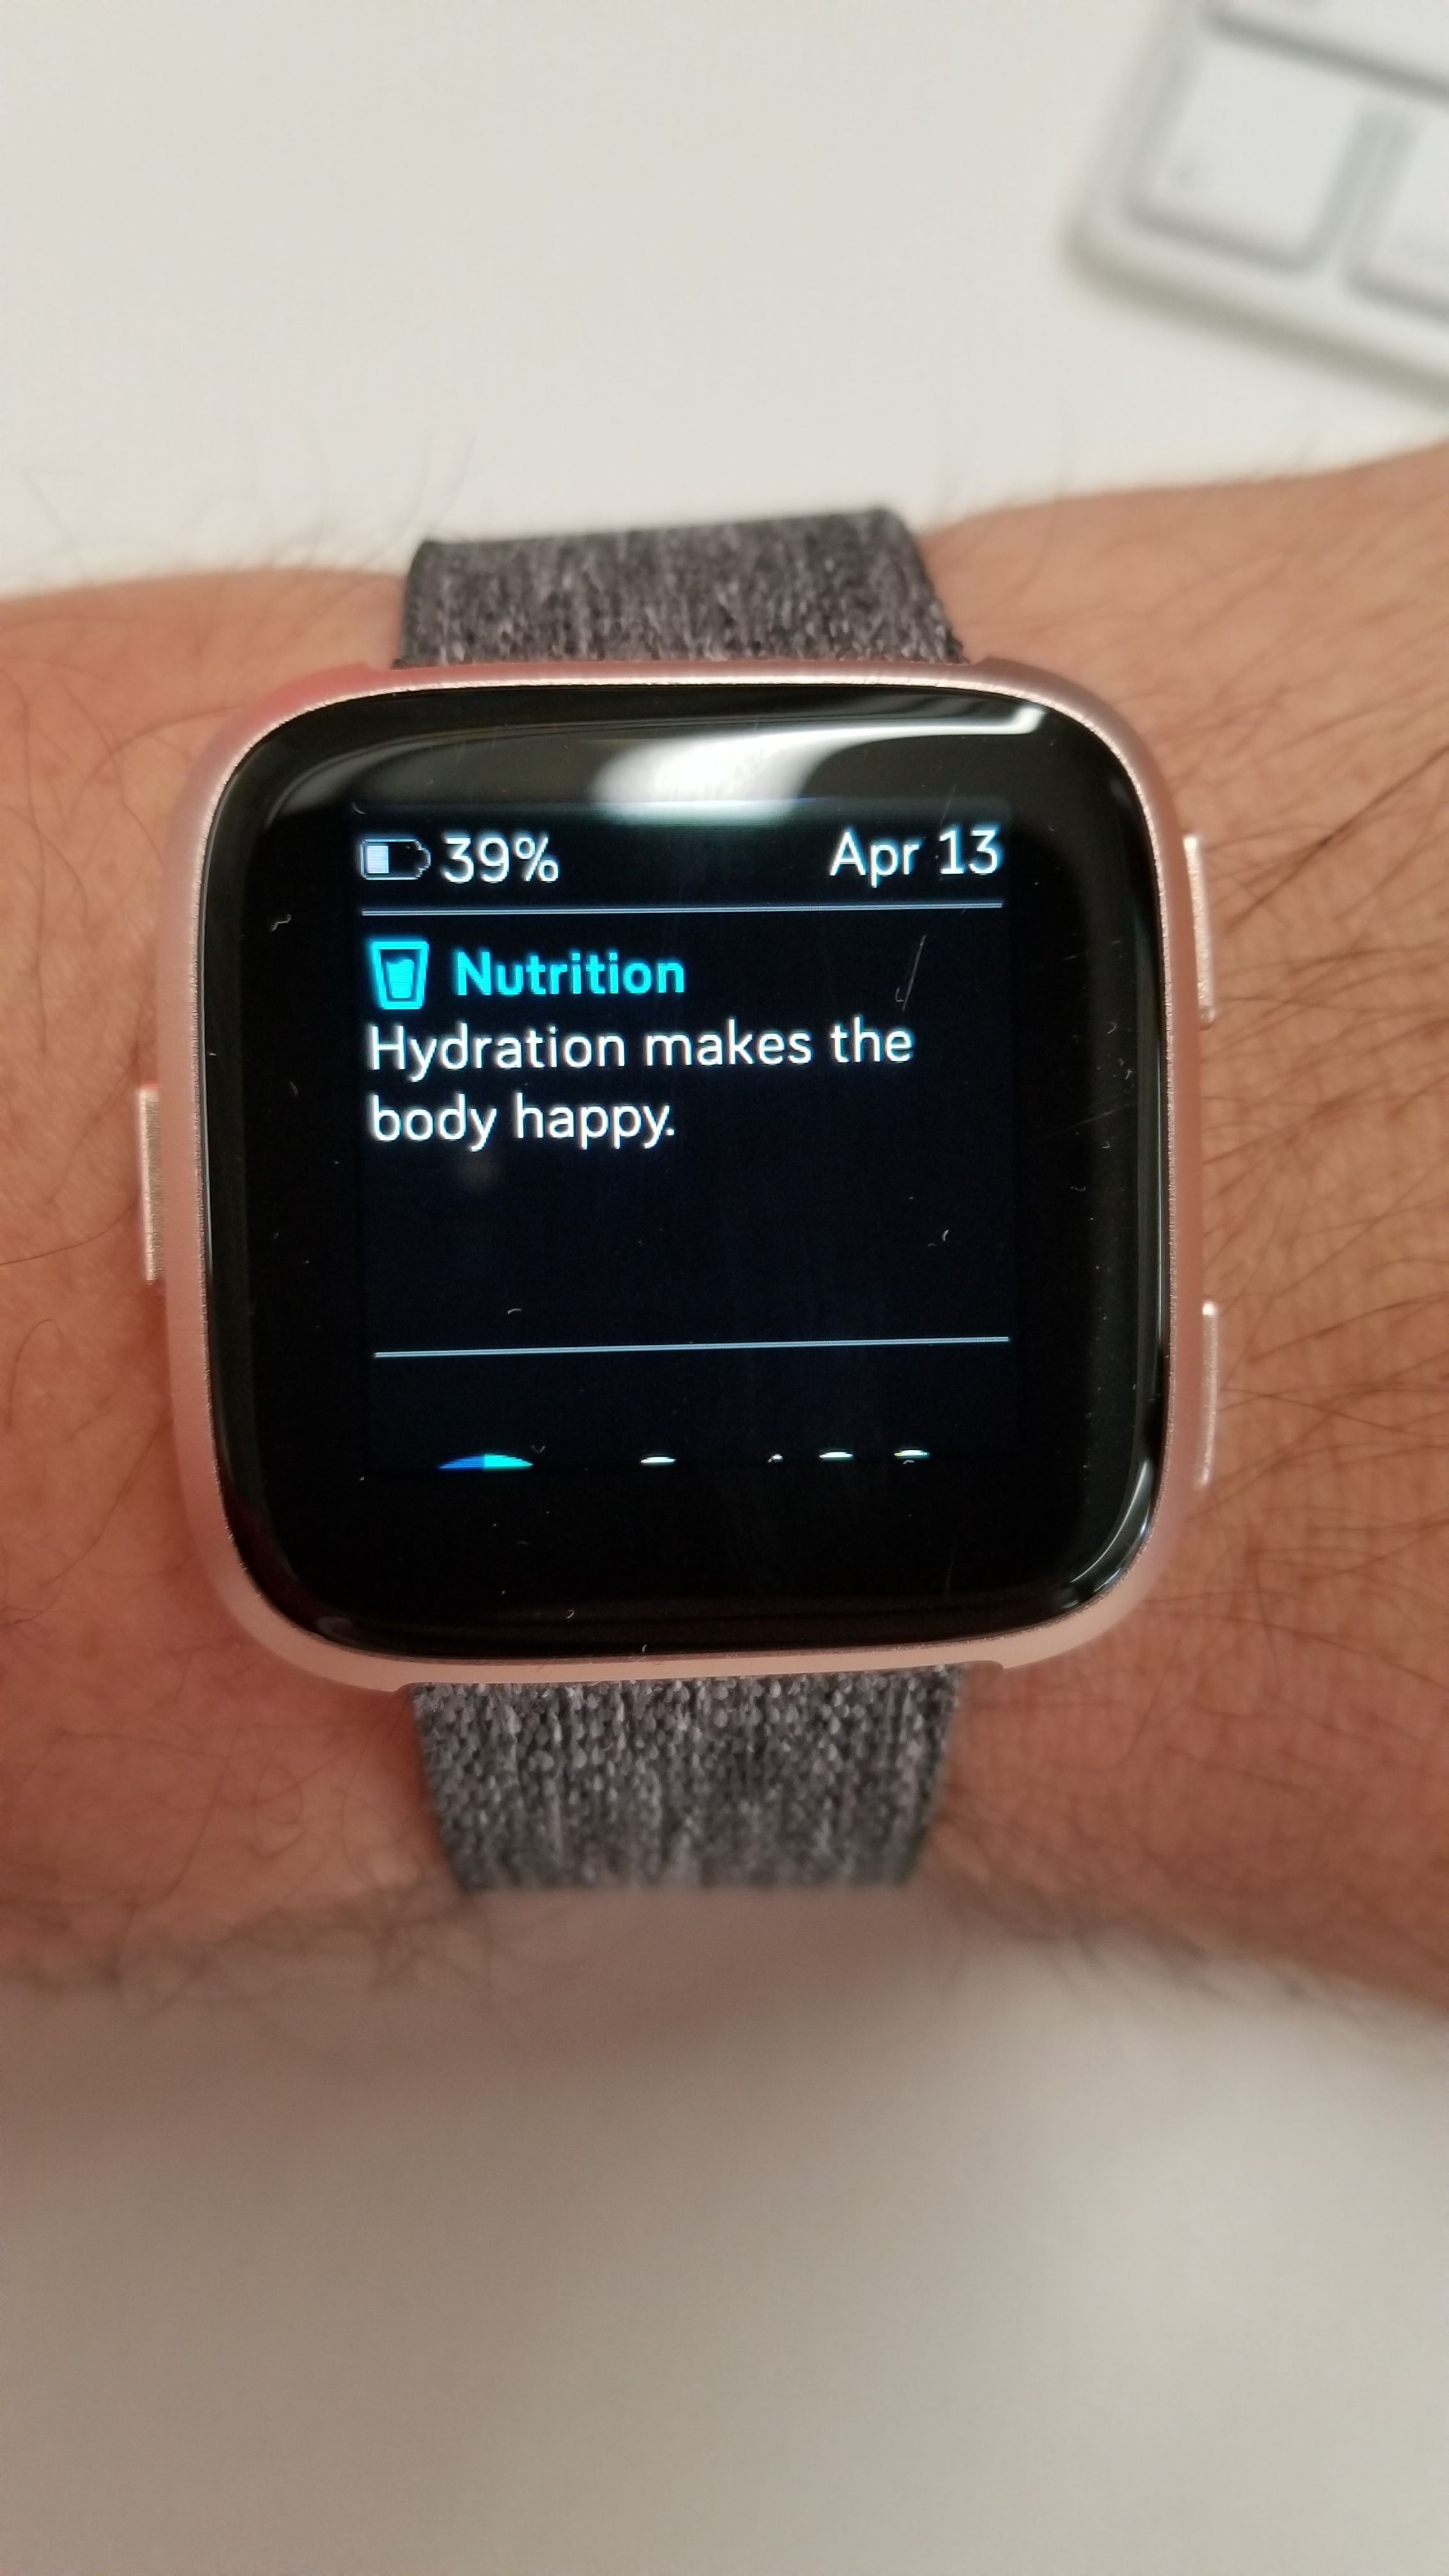 how to set reminders on fitbit versa 2